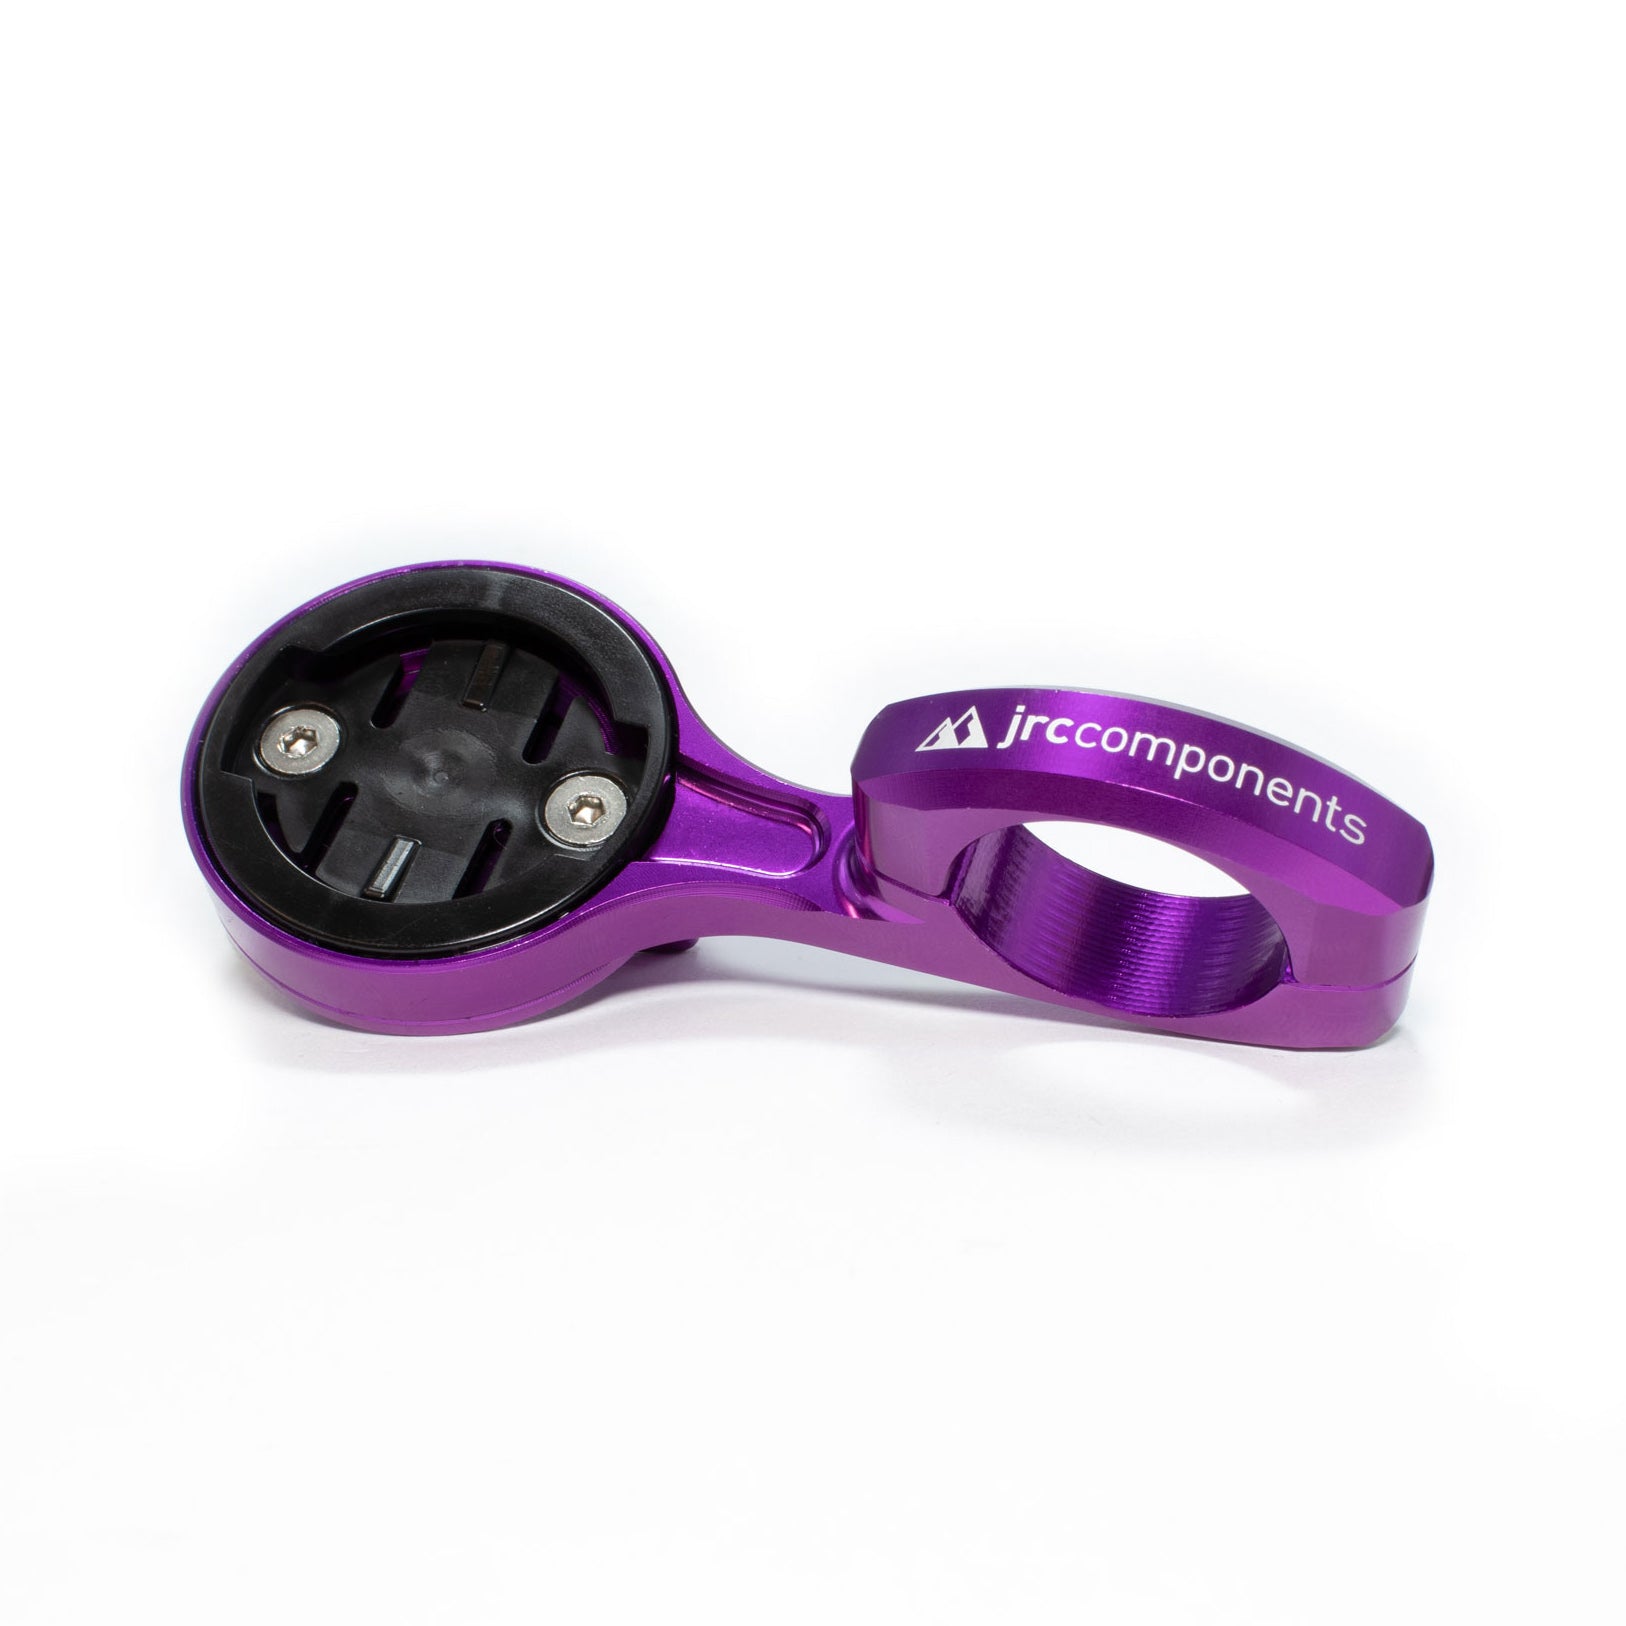 Purple, lightweight, aluminium Garmin GPS computer mount for Time Trial and Triathlons, TT, with compact flick-switch design